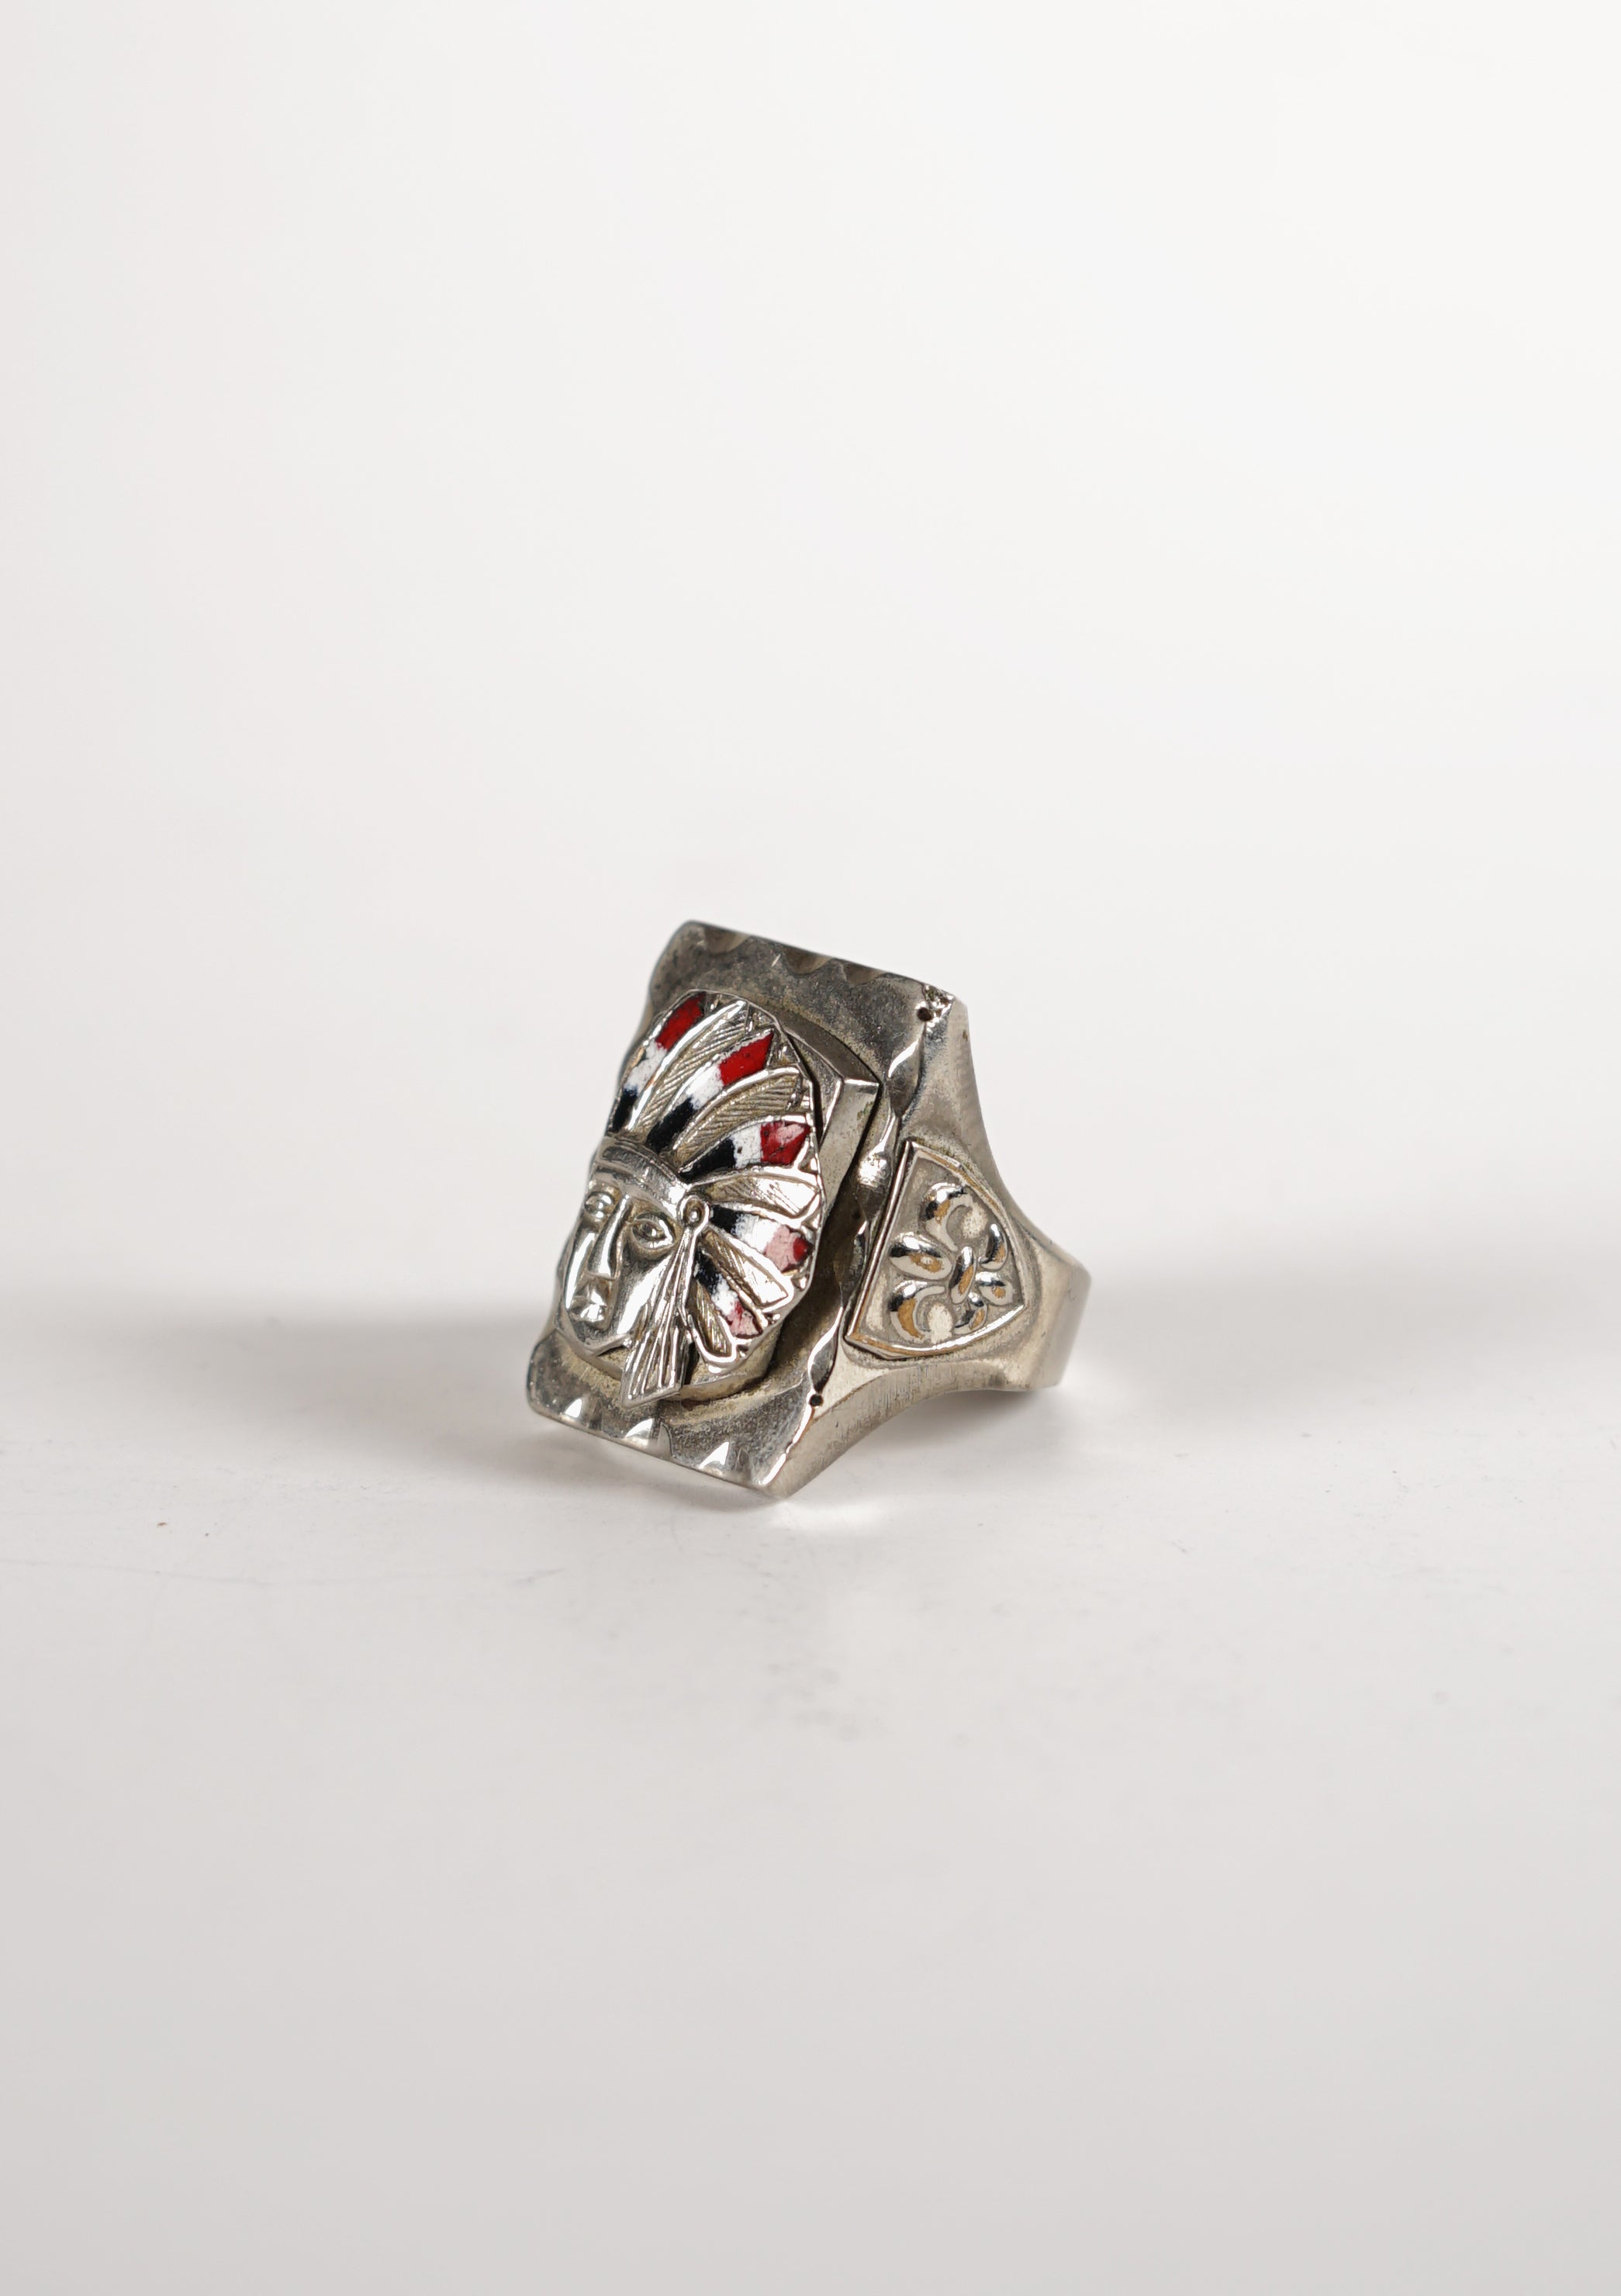 Mexican Biker Ring / Indian